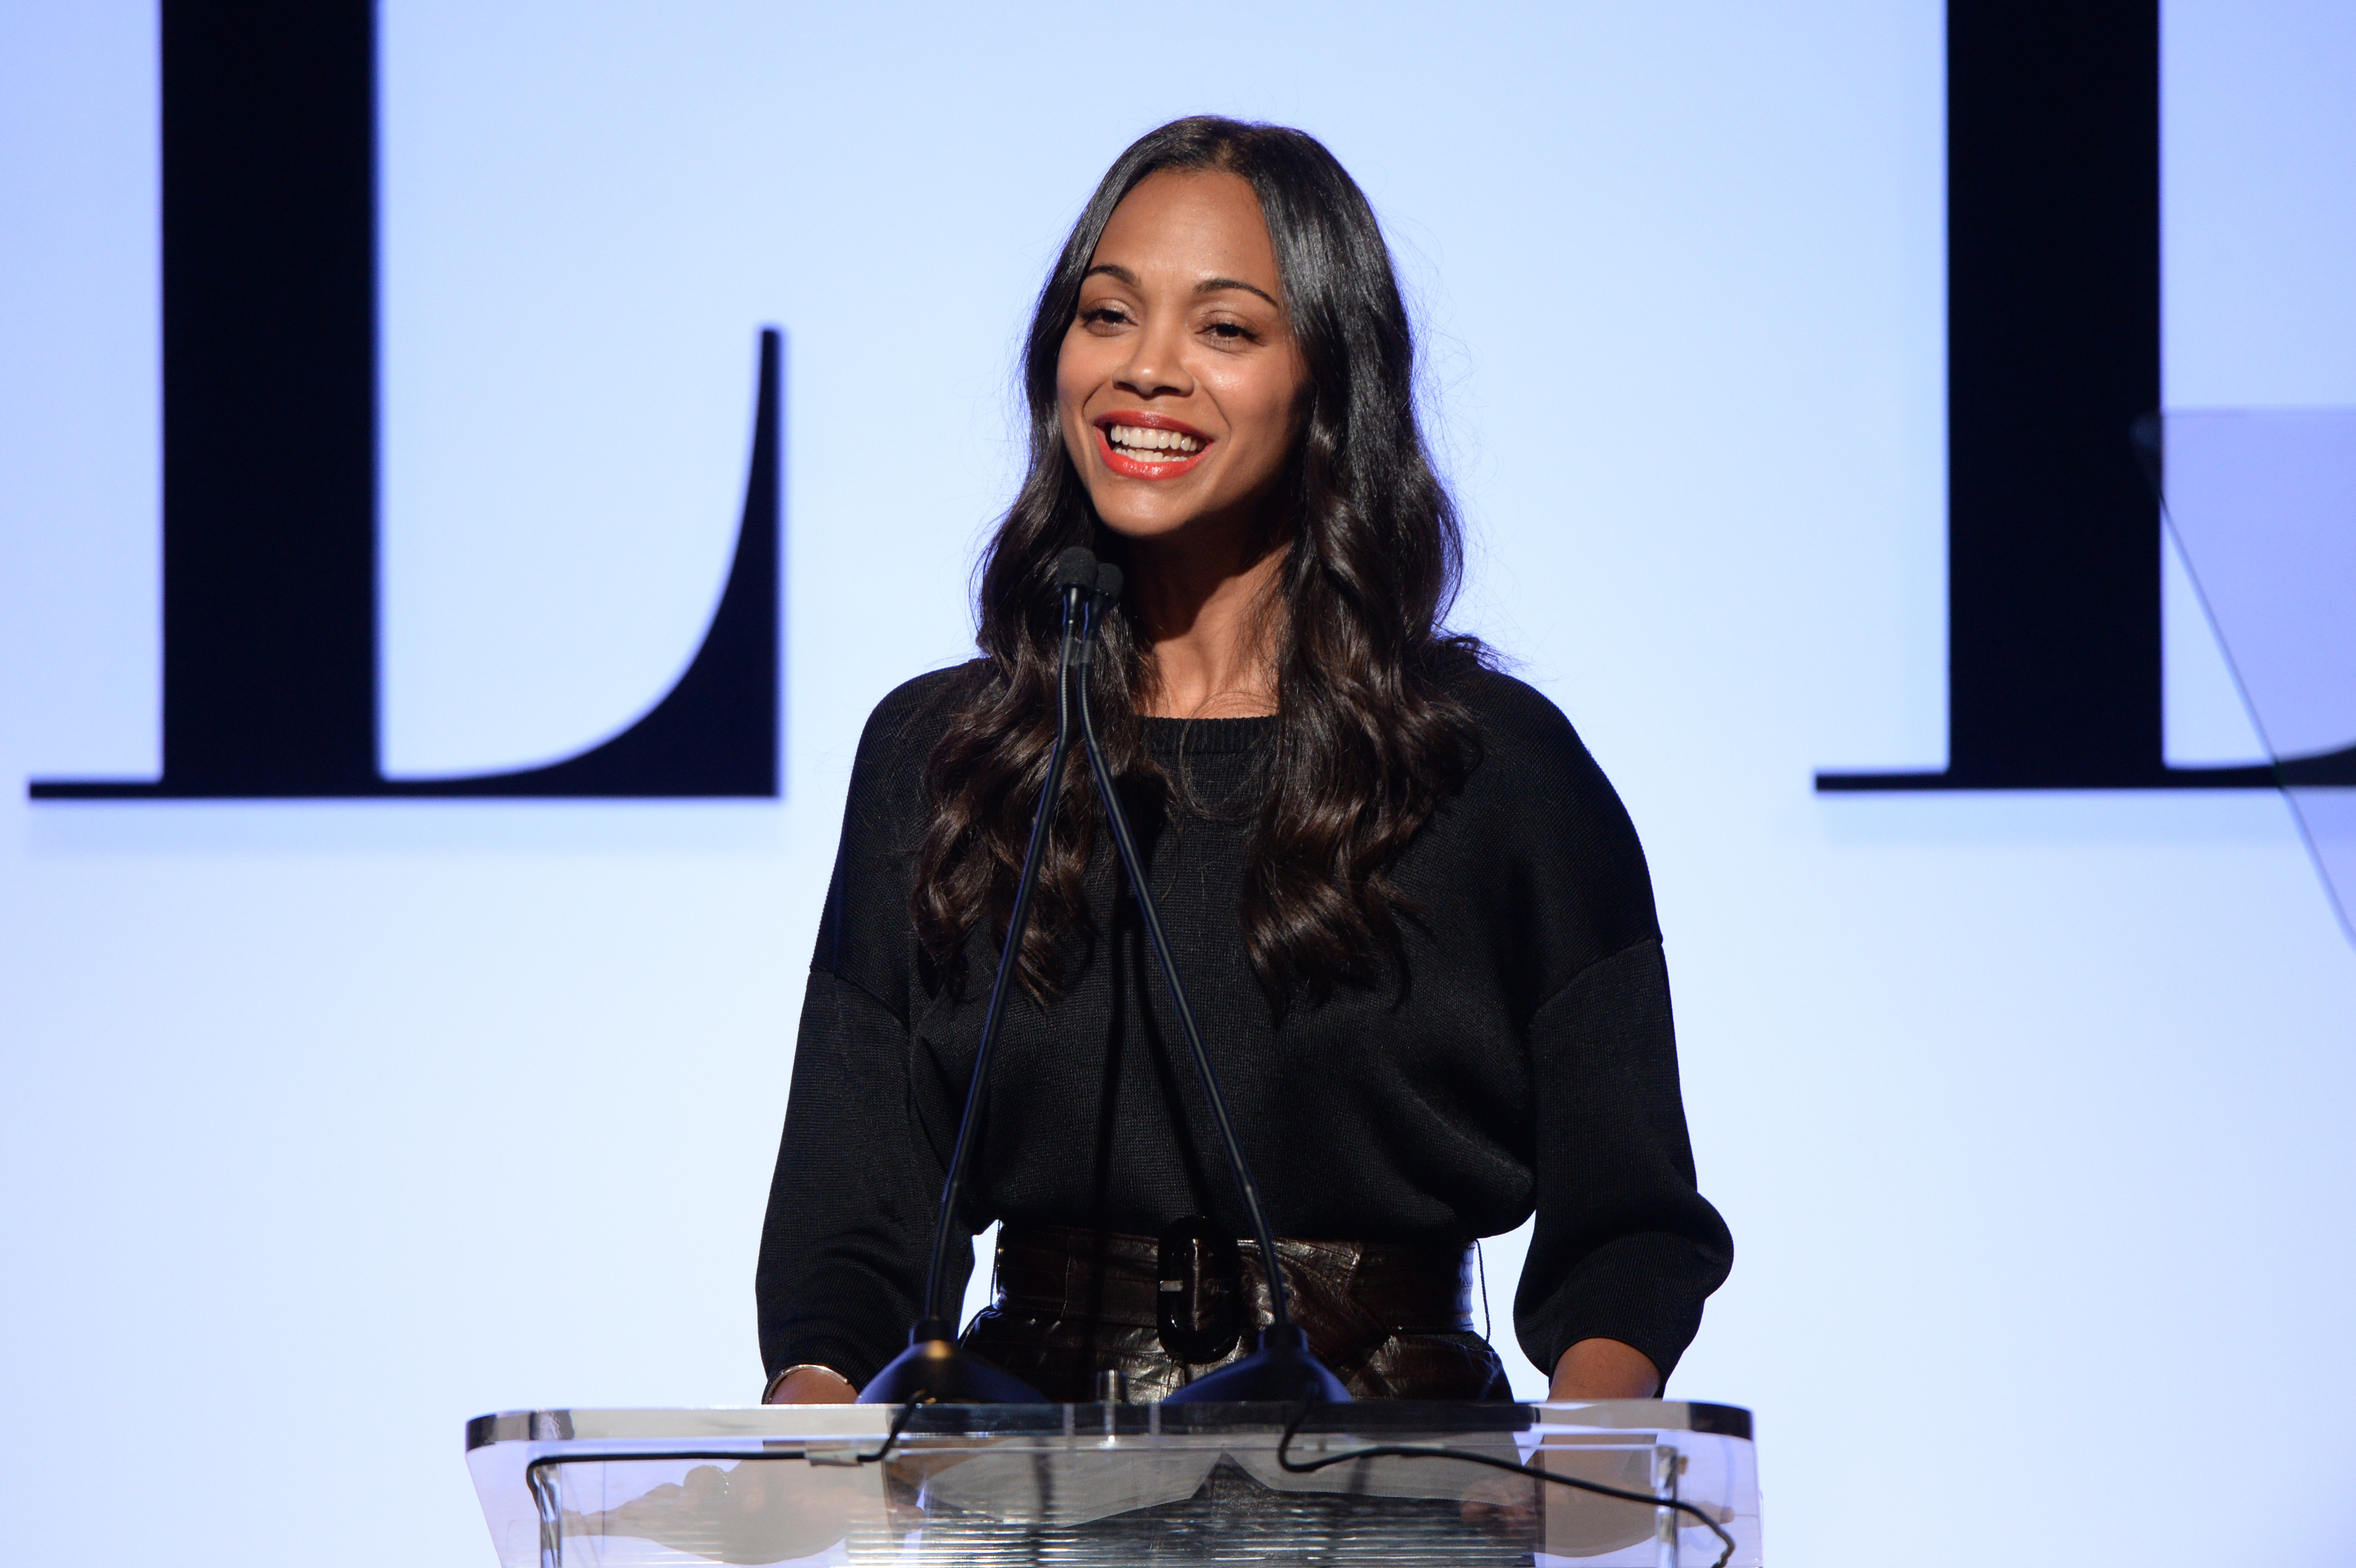 Actress Zoe Saldana speaks onstage during the 22nd Annual ELLE Women in Hollywood Awards presented by Calvin Klein Collection, L’Oréal Paris, and David Yurman at the Four Seasons Los Angeles at Beverly Hills on October 19, 2015 in Beverly Hills, California. (Michael Kovac—Getty Images)